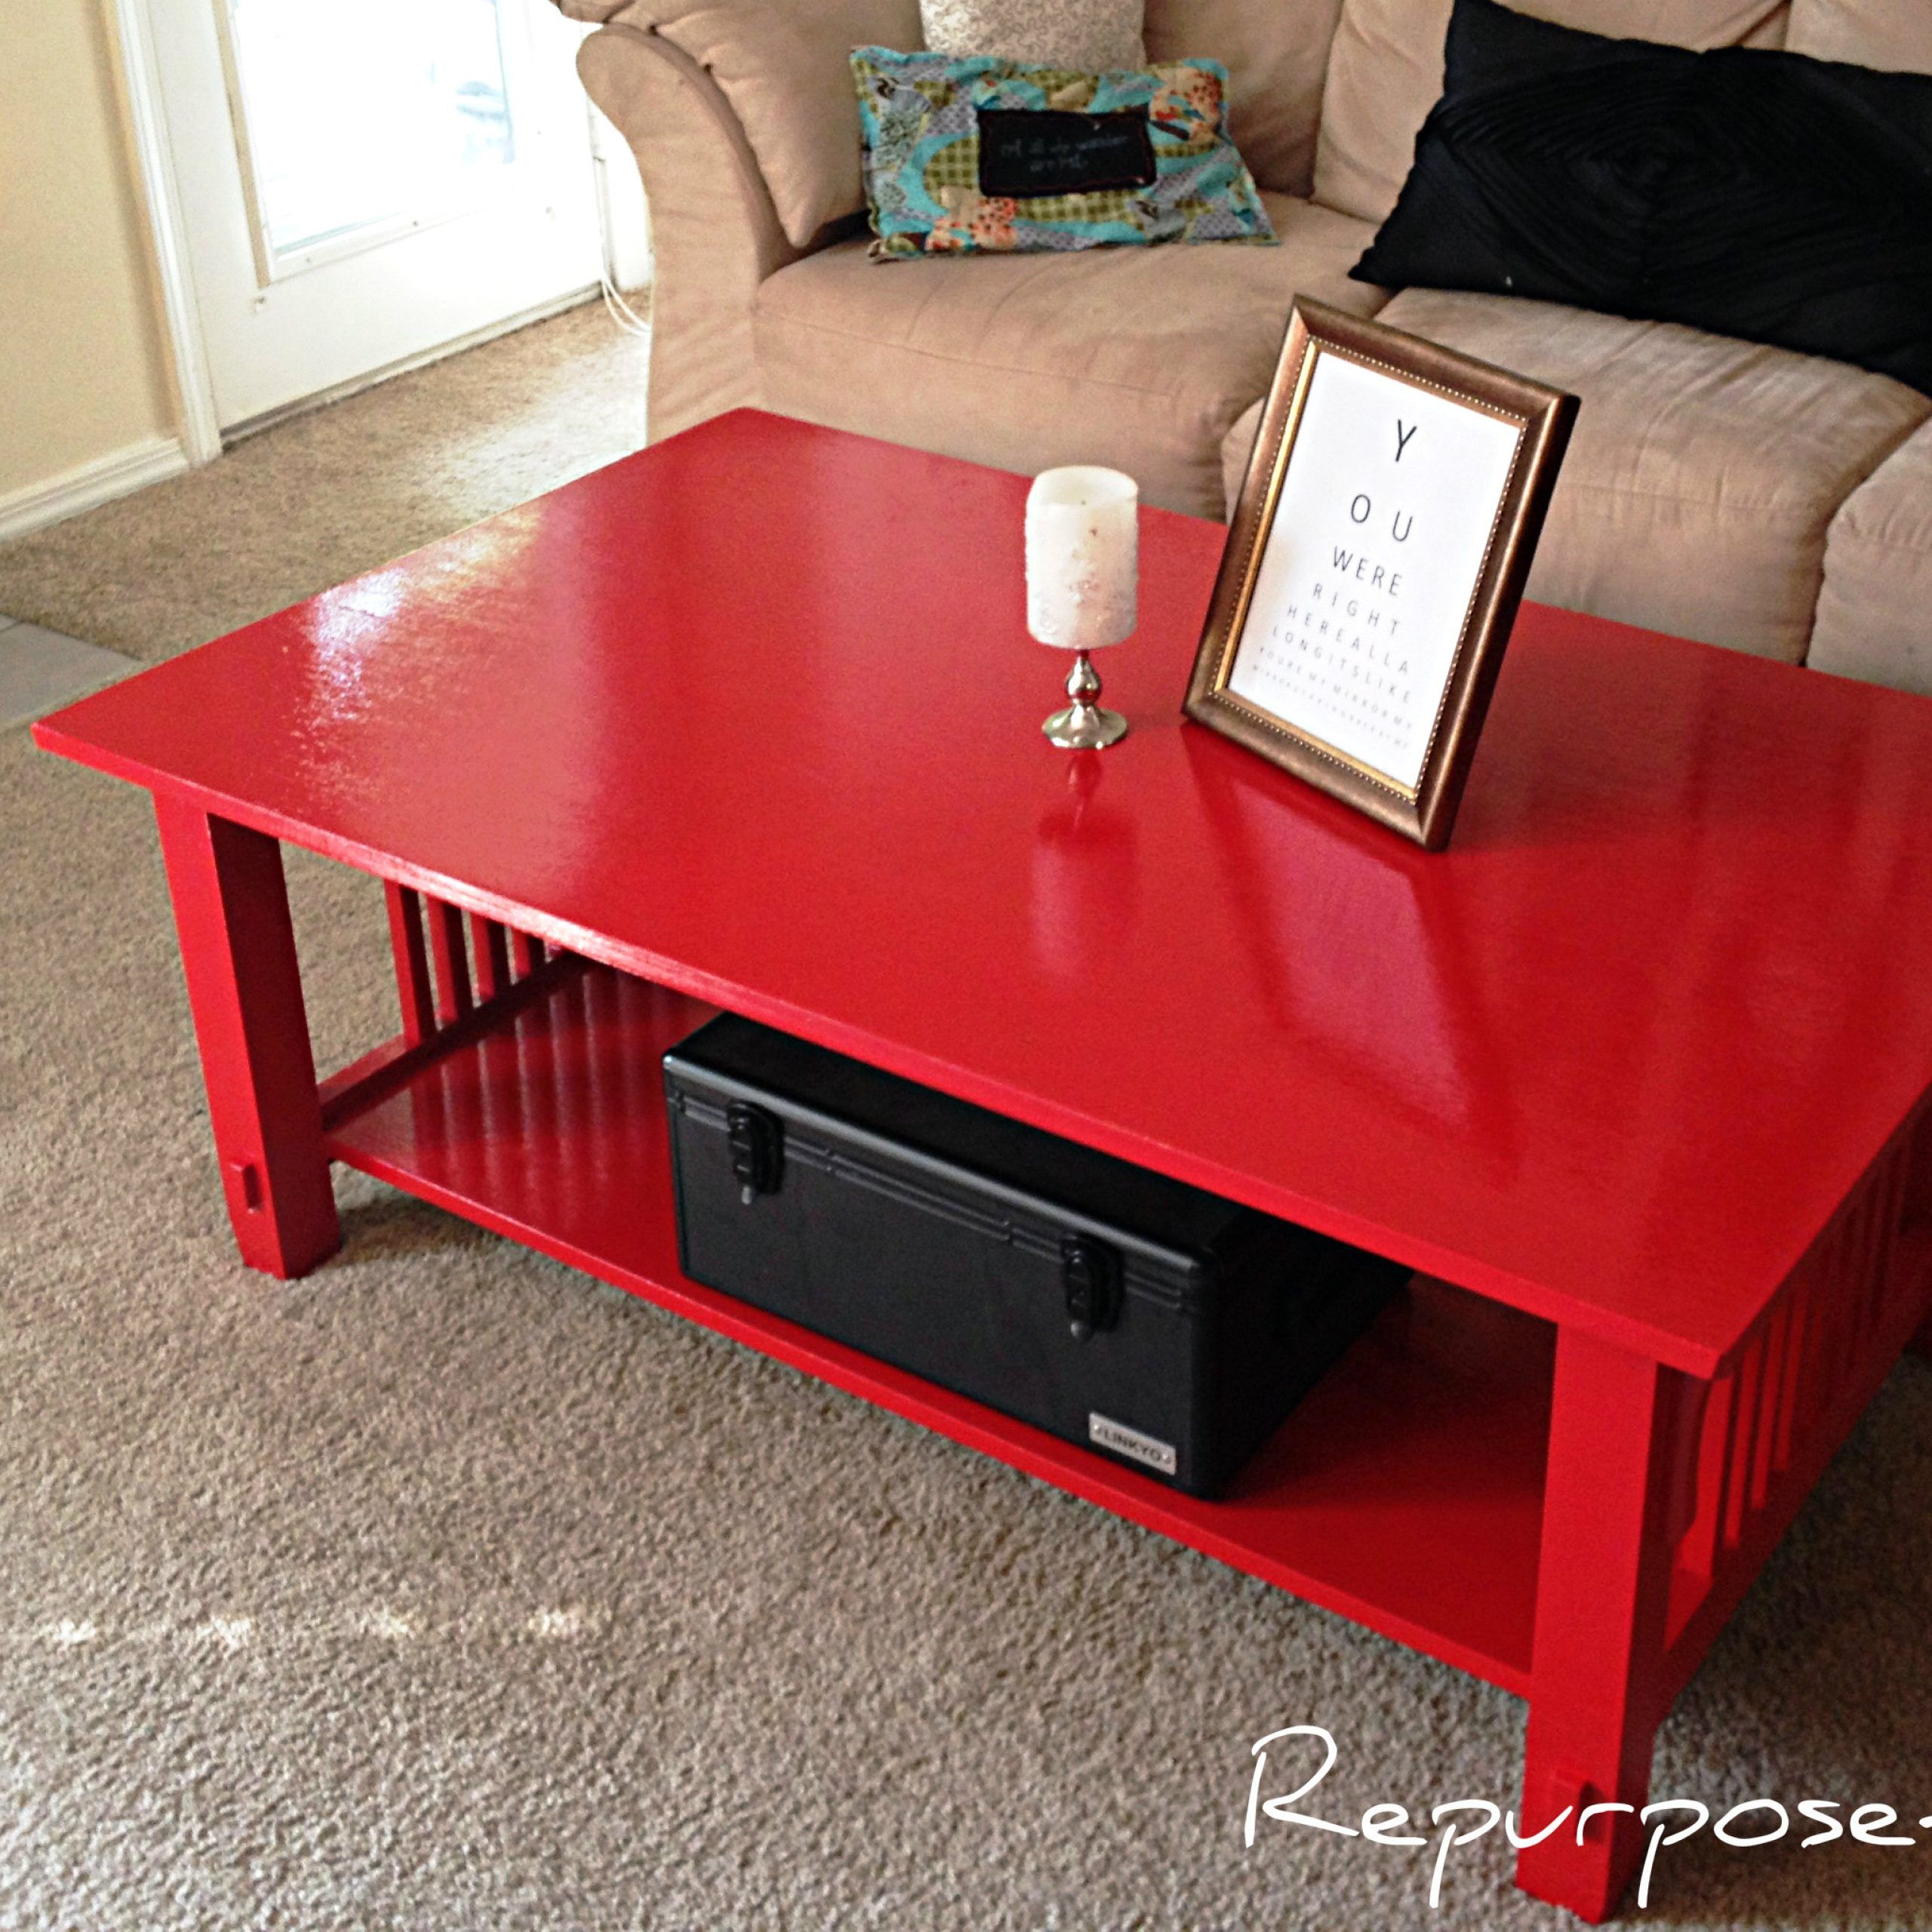 Diy: High Gloss Coffee Table Repurpose | Repurposeful Boutique With Glossy Finished Metal Coffee Tables (View 8 of 15)